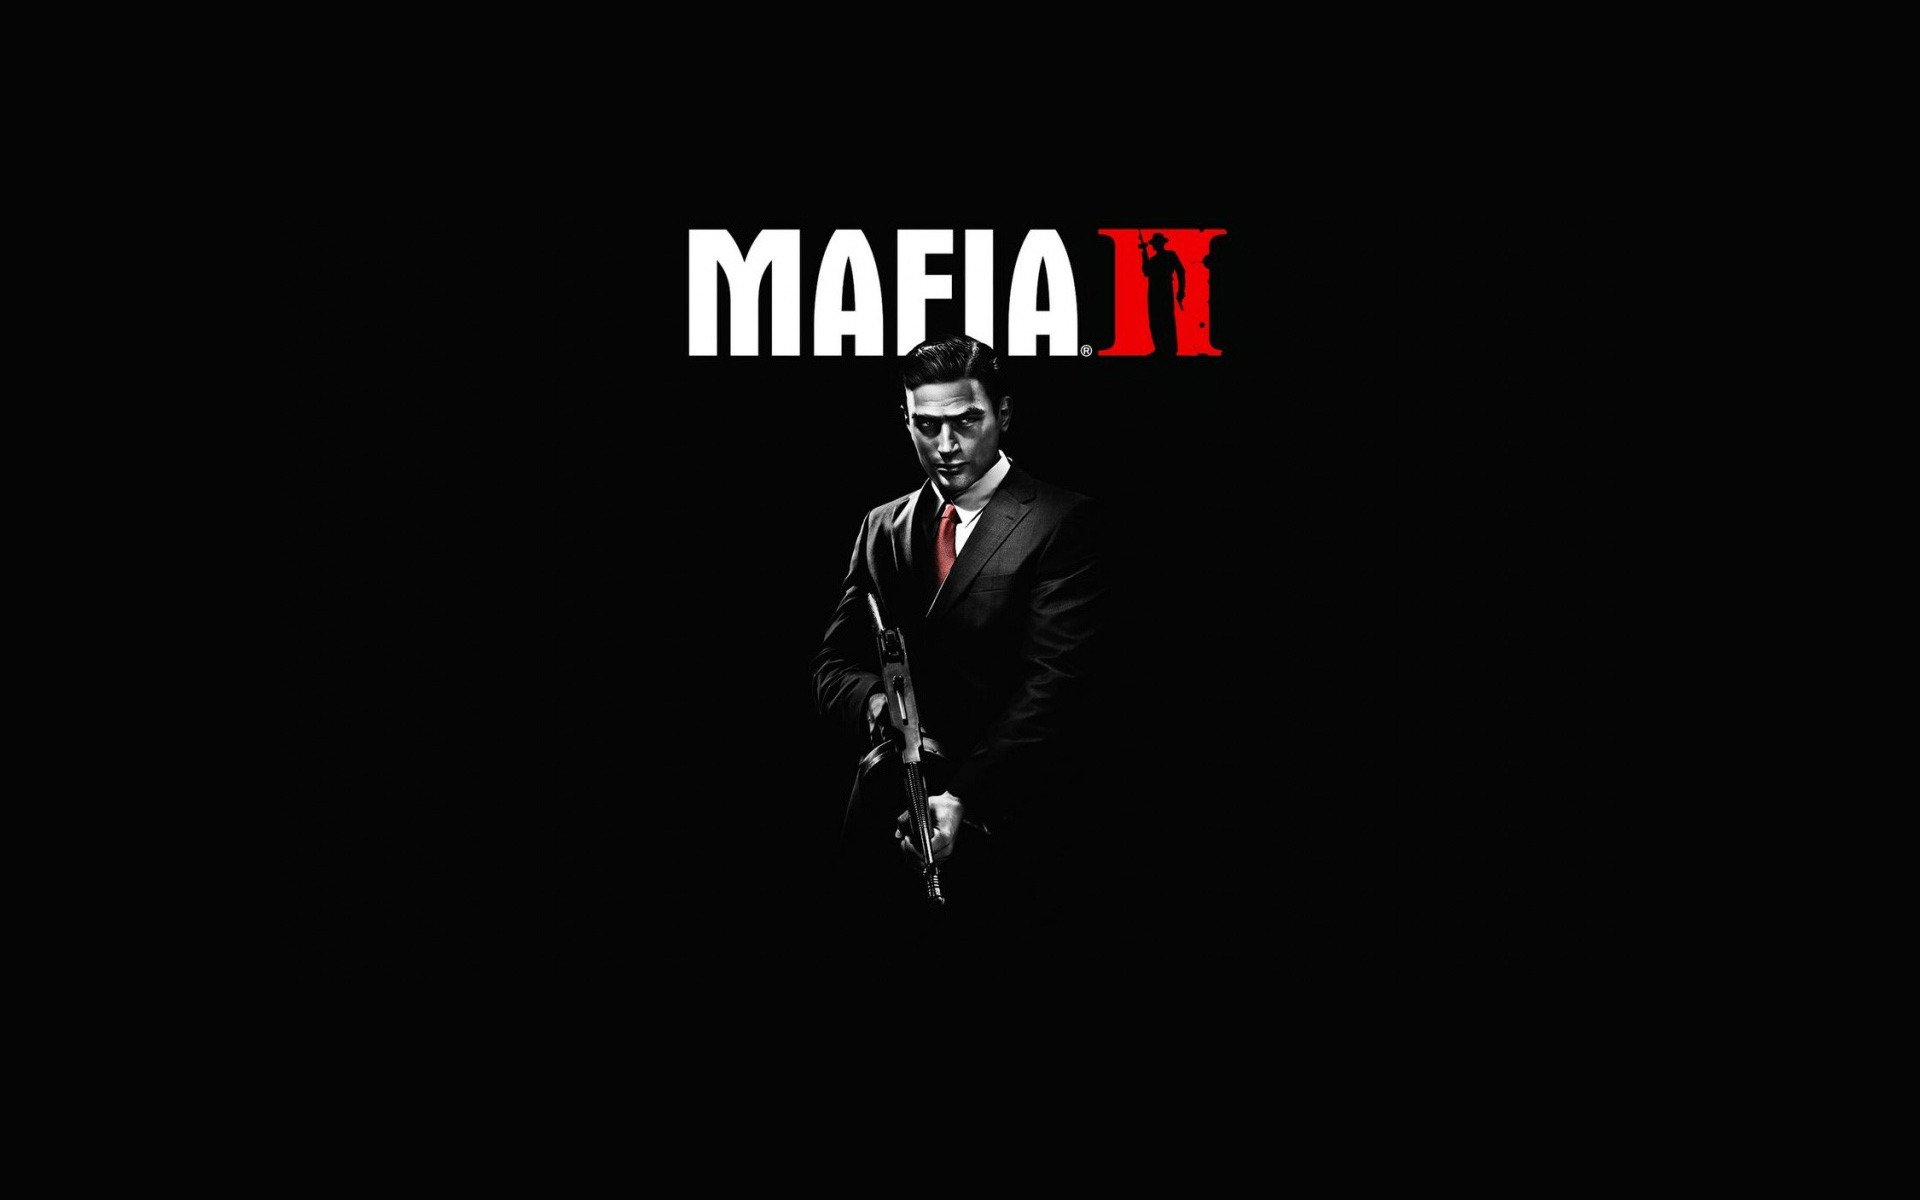 Download wallpapers and backgrounds with images of mafia. 